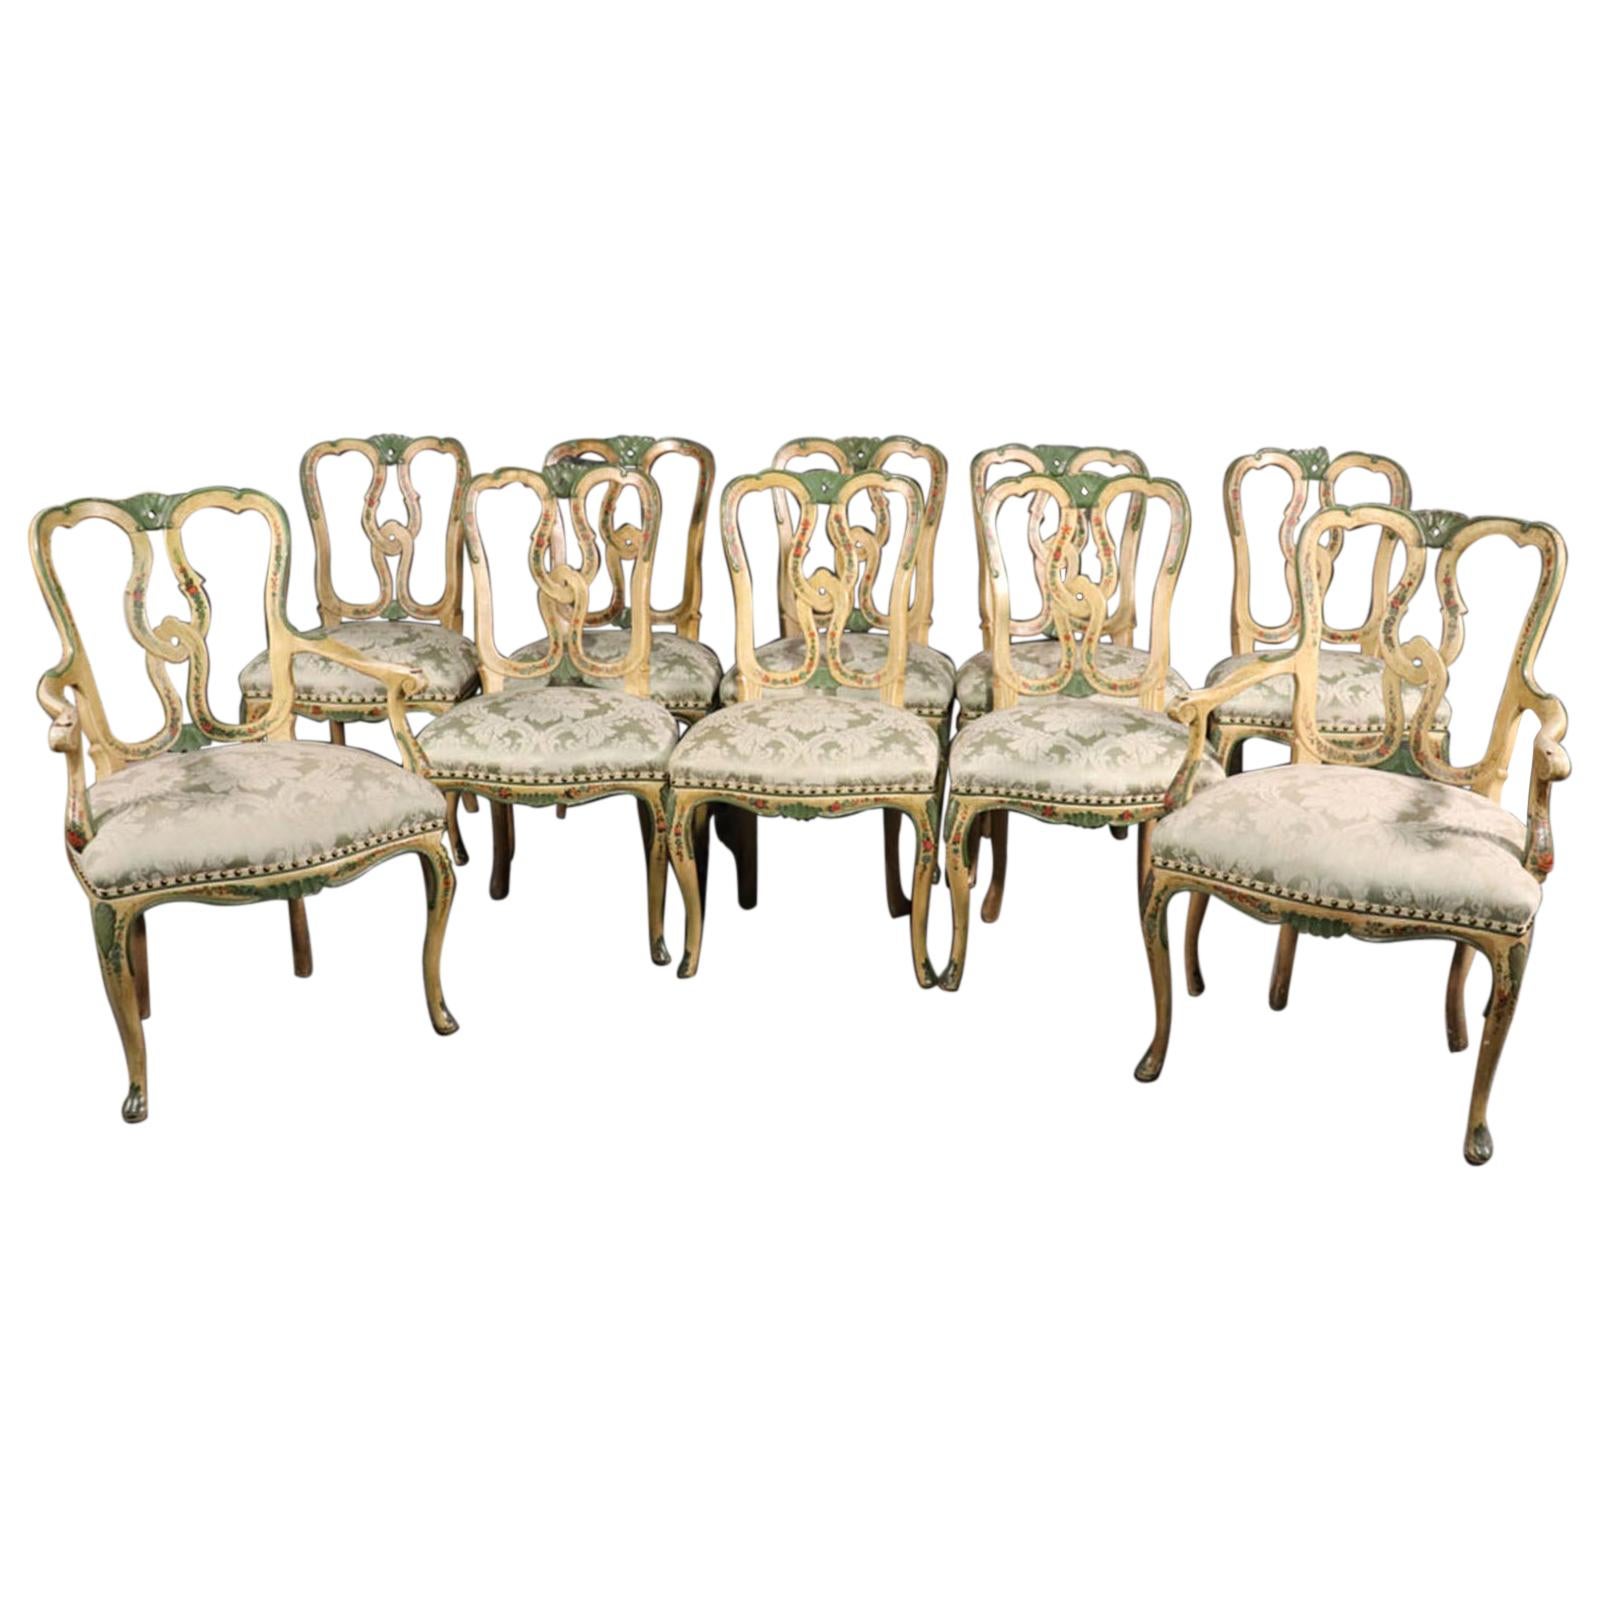 Superb Set of 10 Paint Decorated Italian Venetian Florentine Dining Chairs